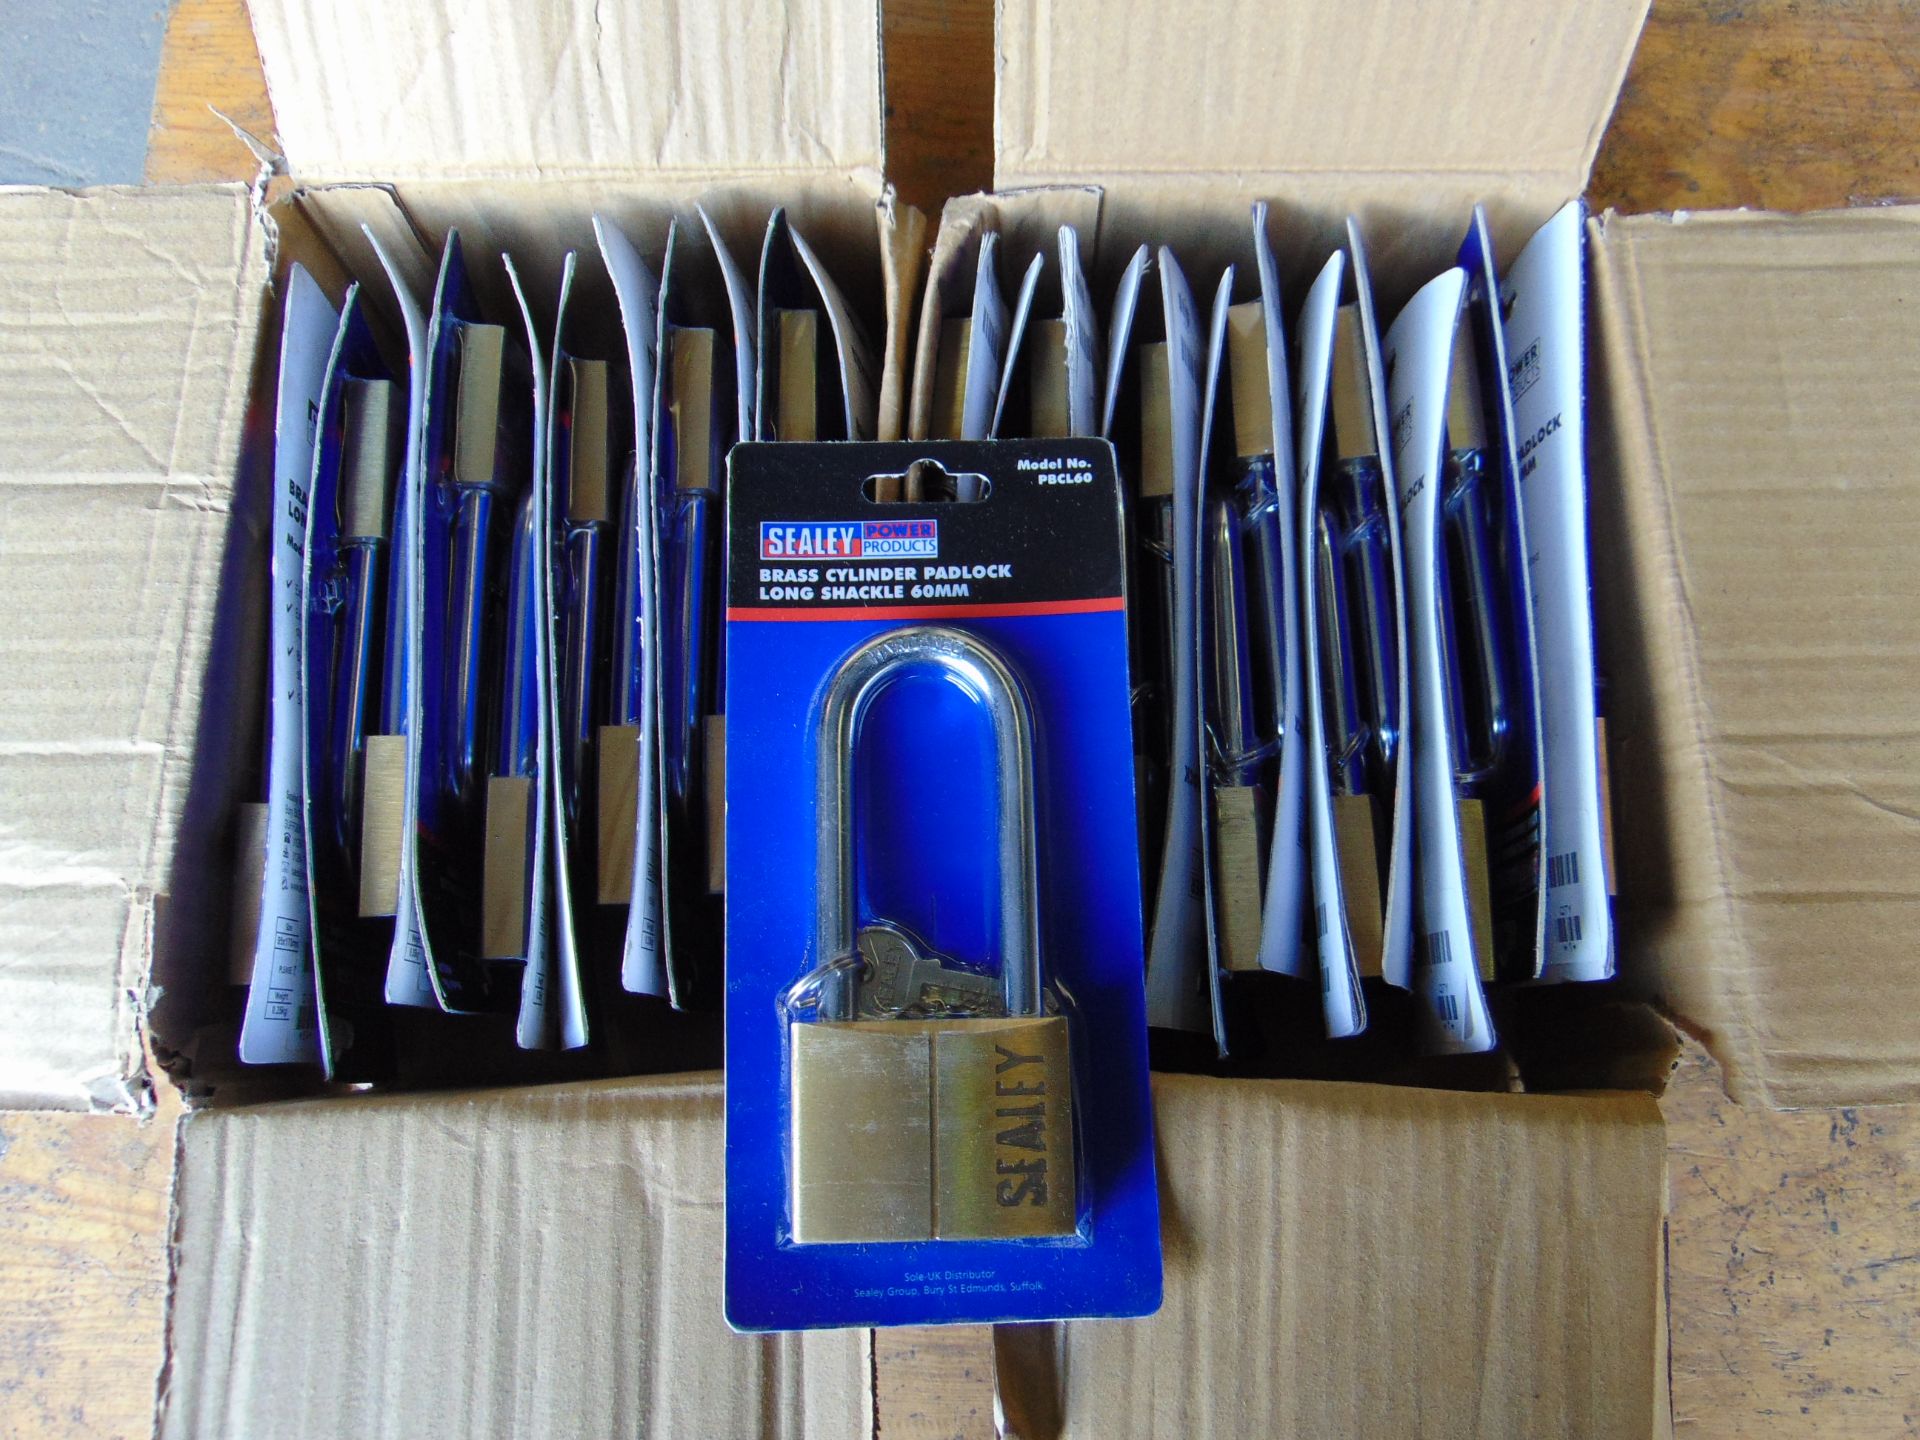 24 x New Sealey Padlock w/ Brass Cylinder - Long Shackle 60mm - in Original Packaging - Image 2 of 4